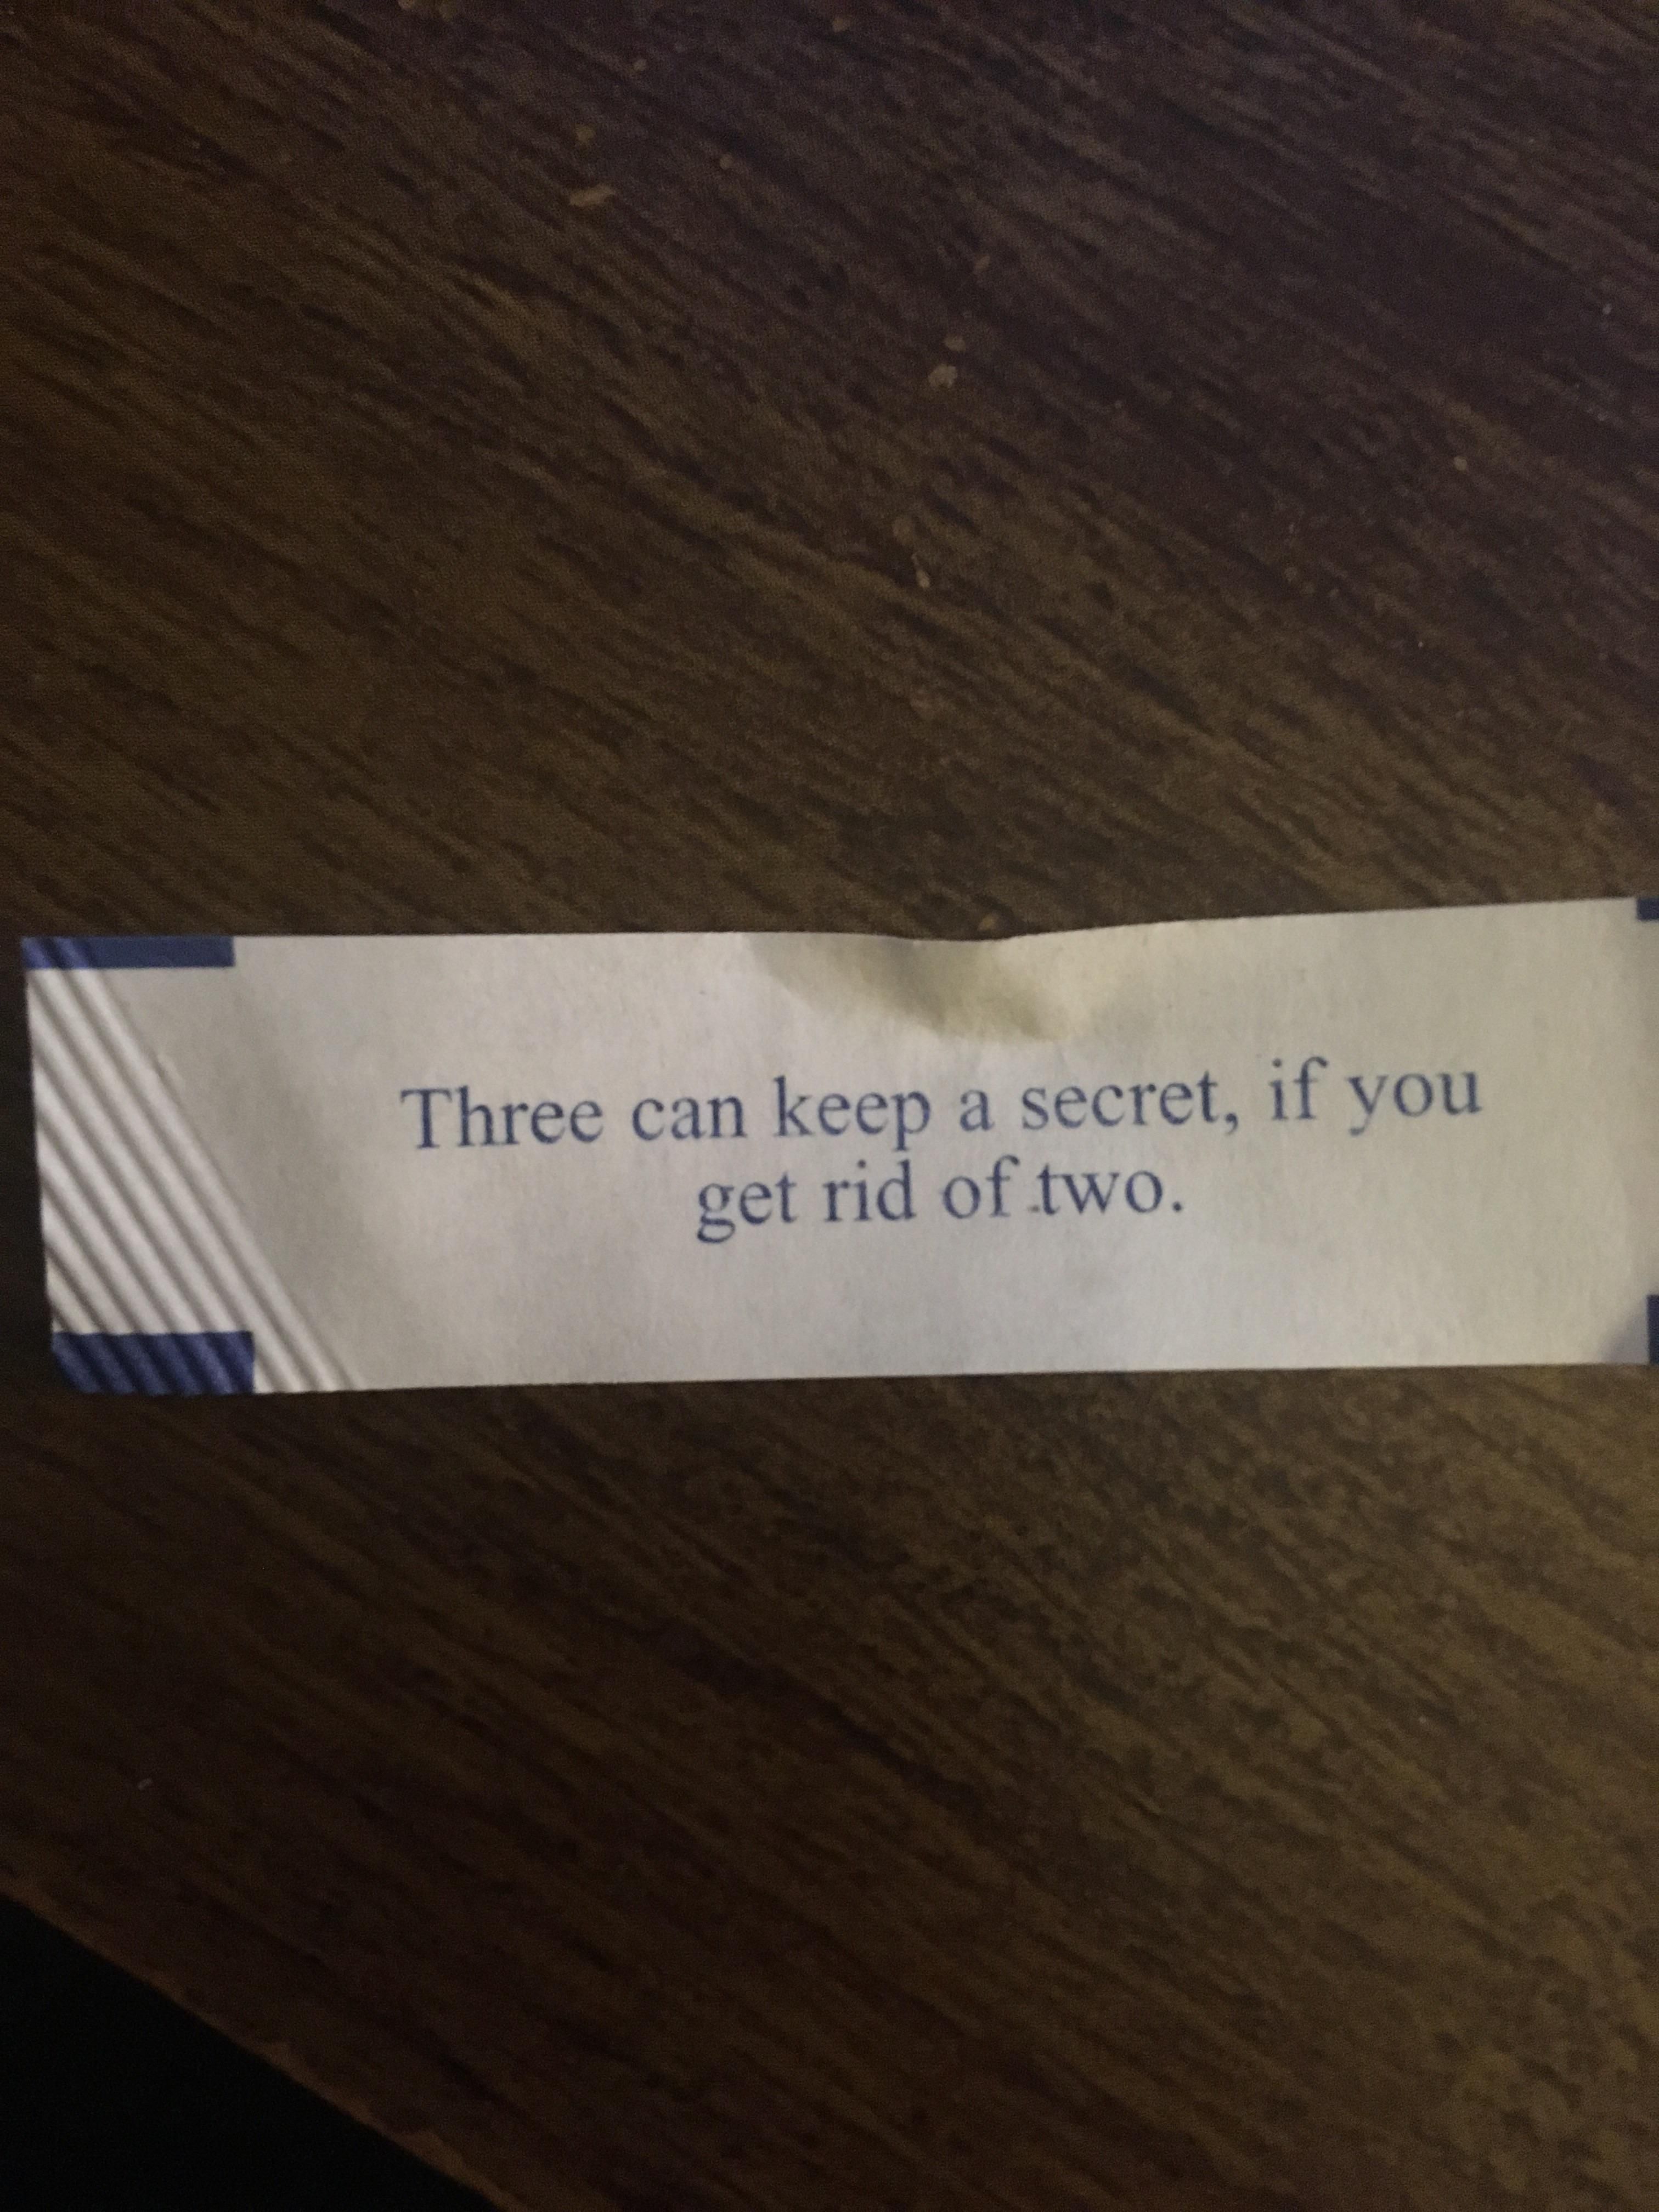 My fortune cookie has either seen or done some shit.